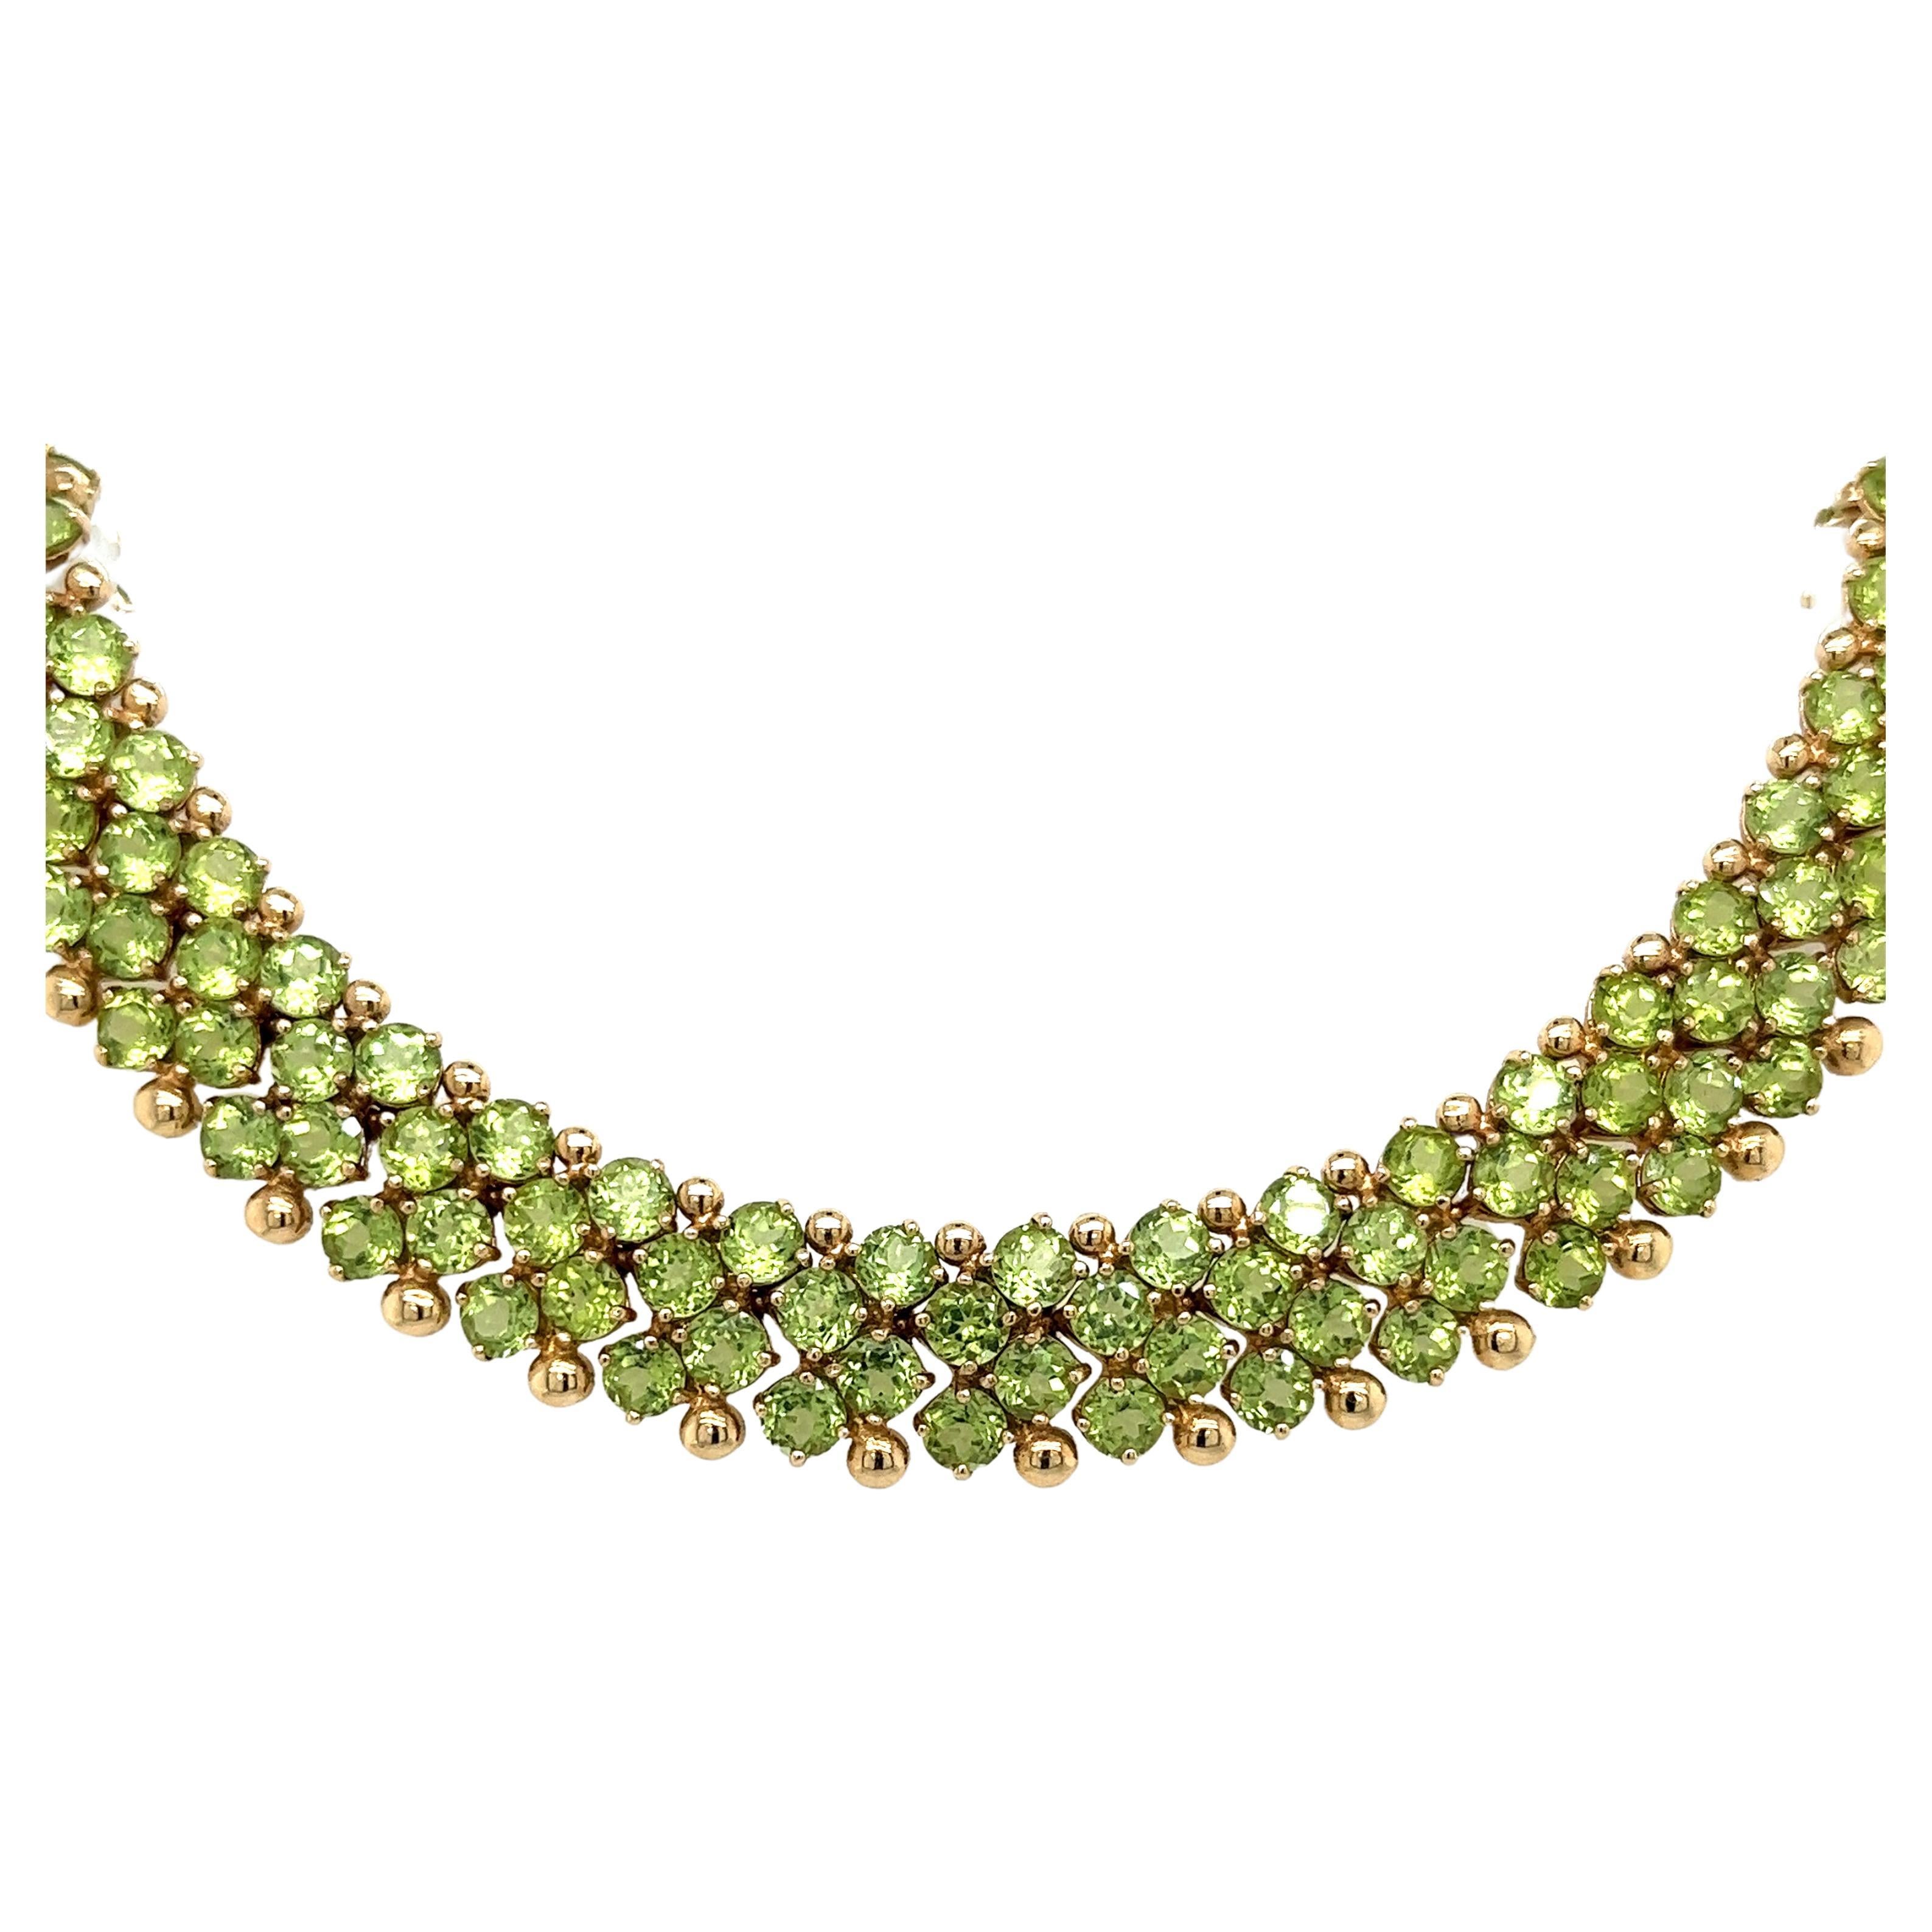 Elevate your style with this breathtaking 45-carat peridot gemstone cluster choker necklace. These natural gemstones are full of brilliance and luster, and are set in a 14-karat shiny yellow gold. This necklace sits beautifully on the neck,